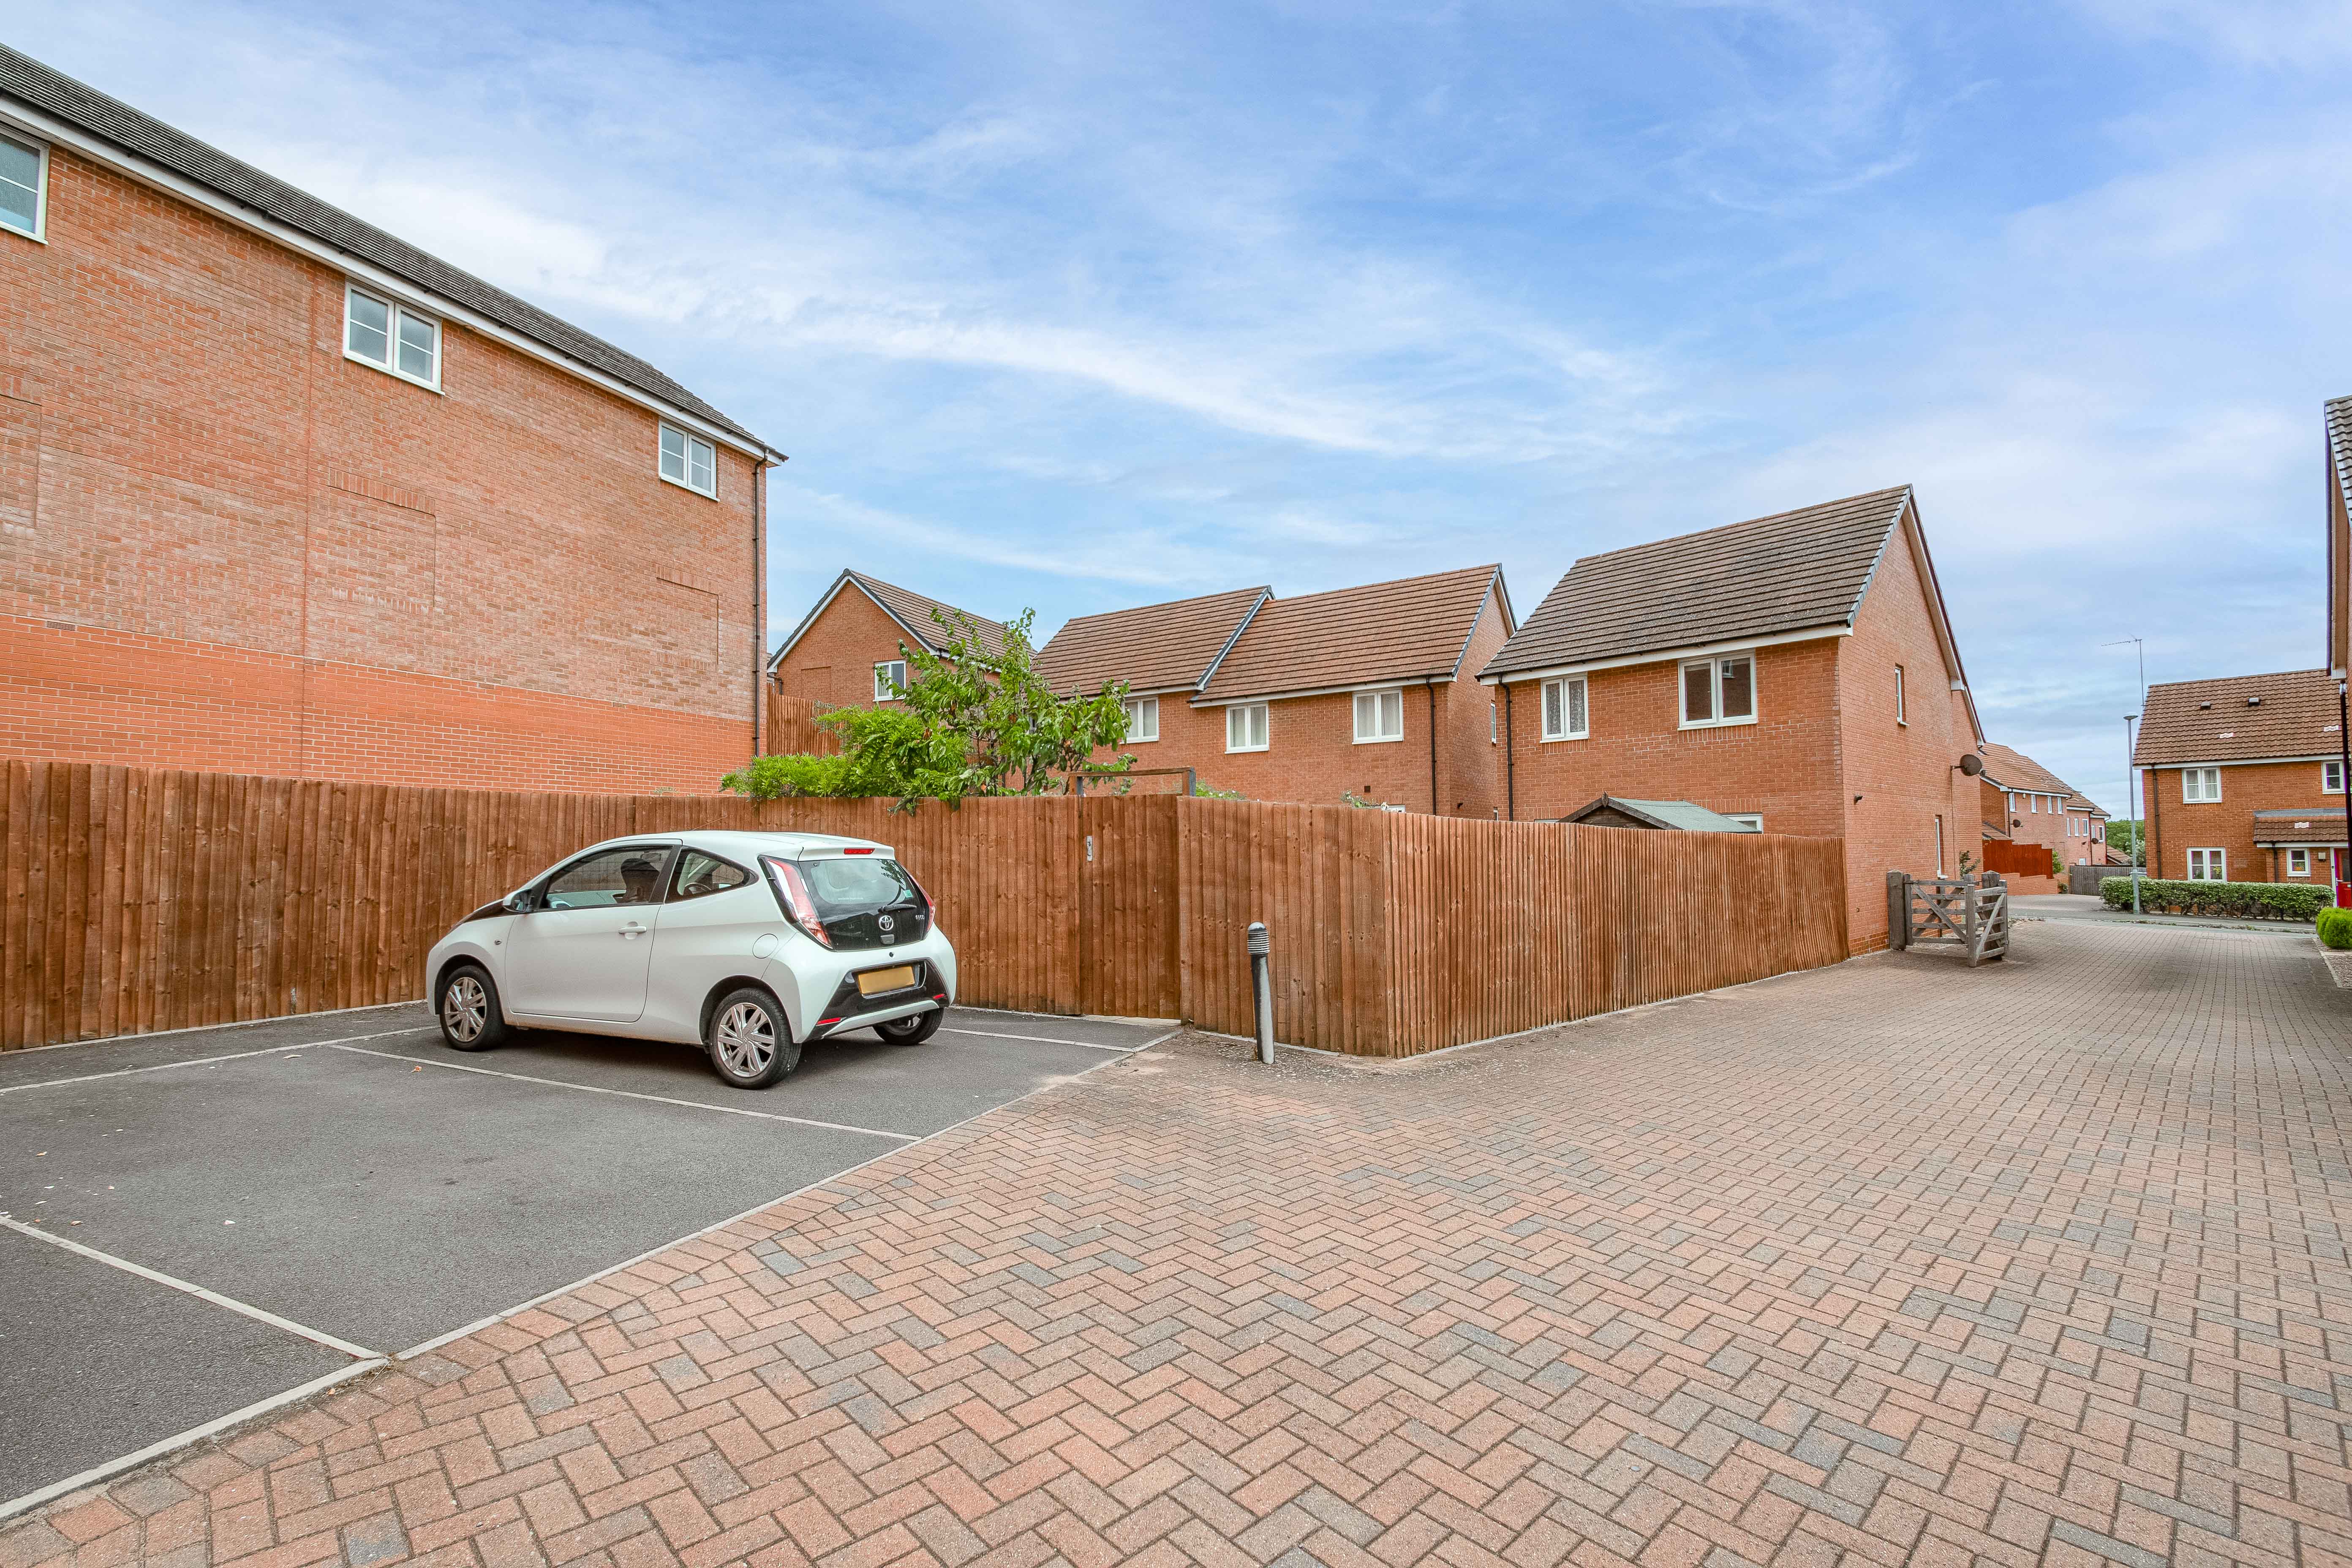 3 bed house for sale in Dovecote Close, Brockhill 1